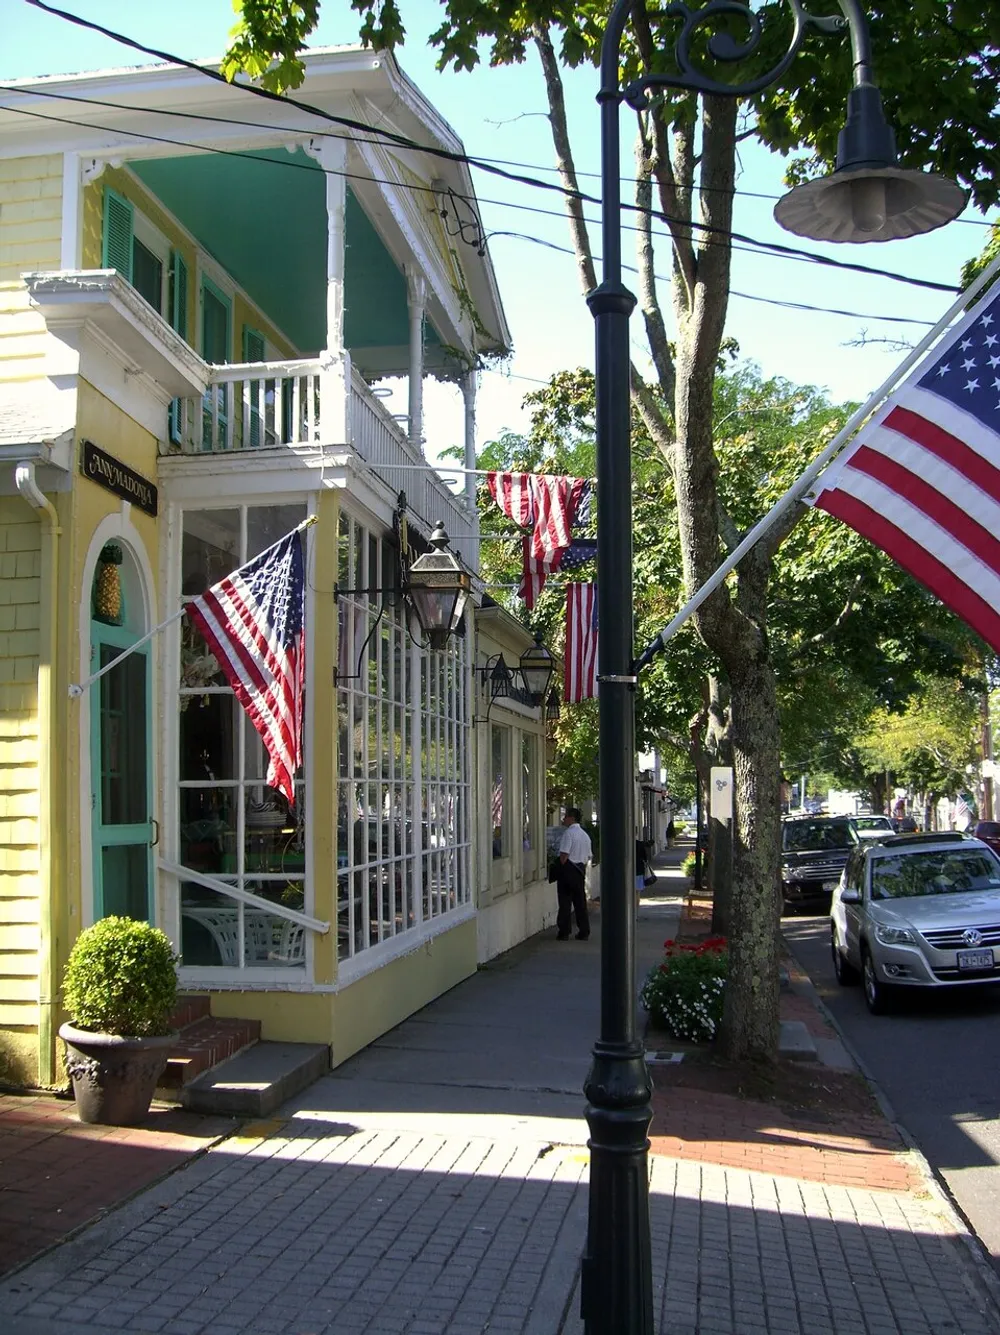 An American flag-adorned street scene featuring a person walking by a quaint yellow building with a green balcony street lamps and parked cars